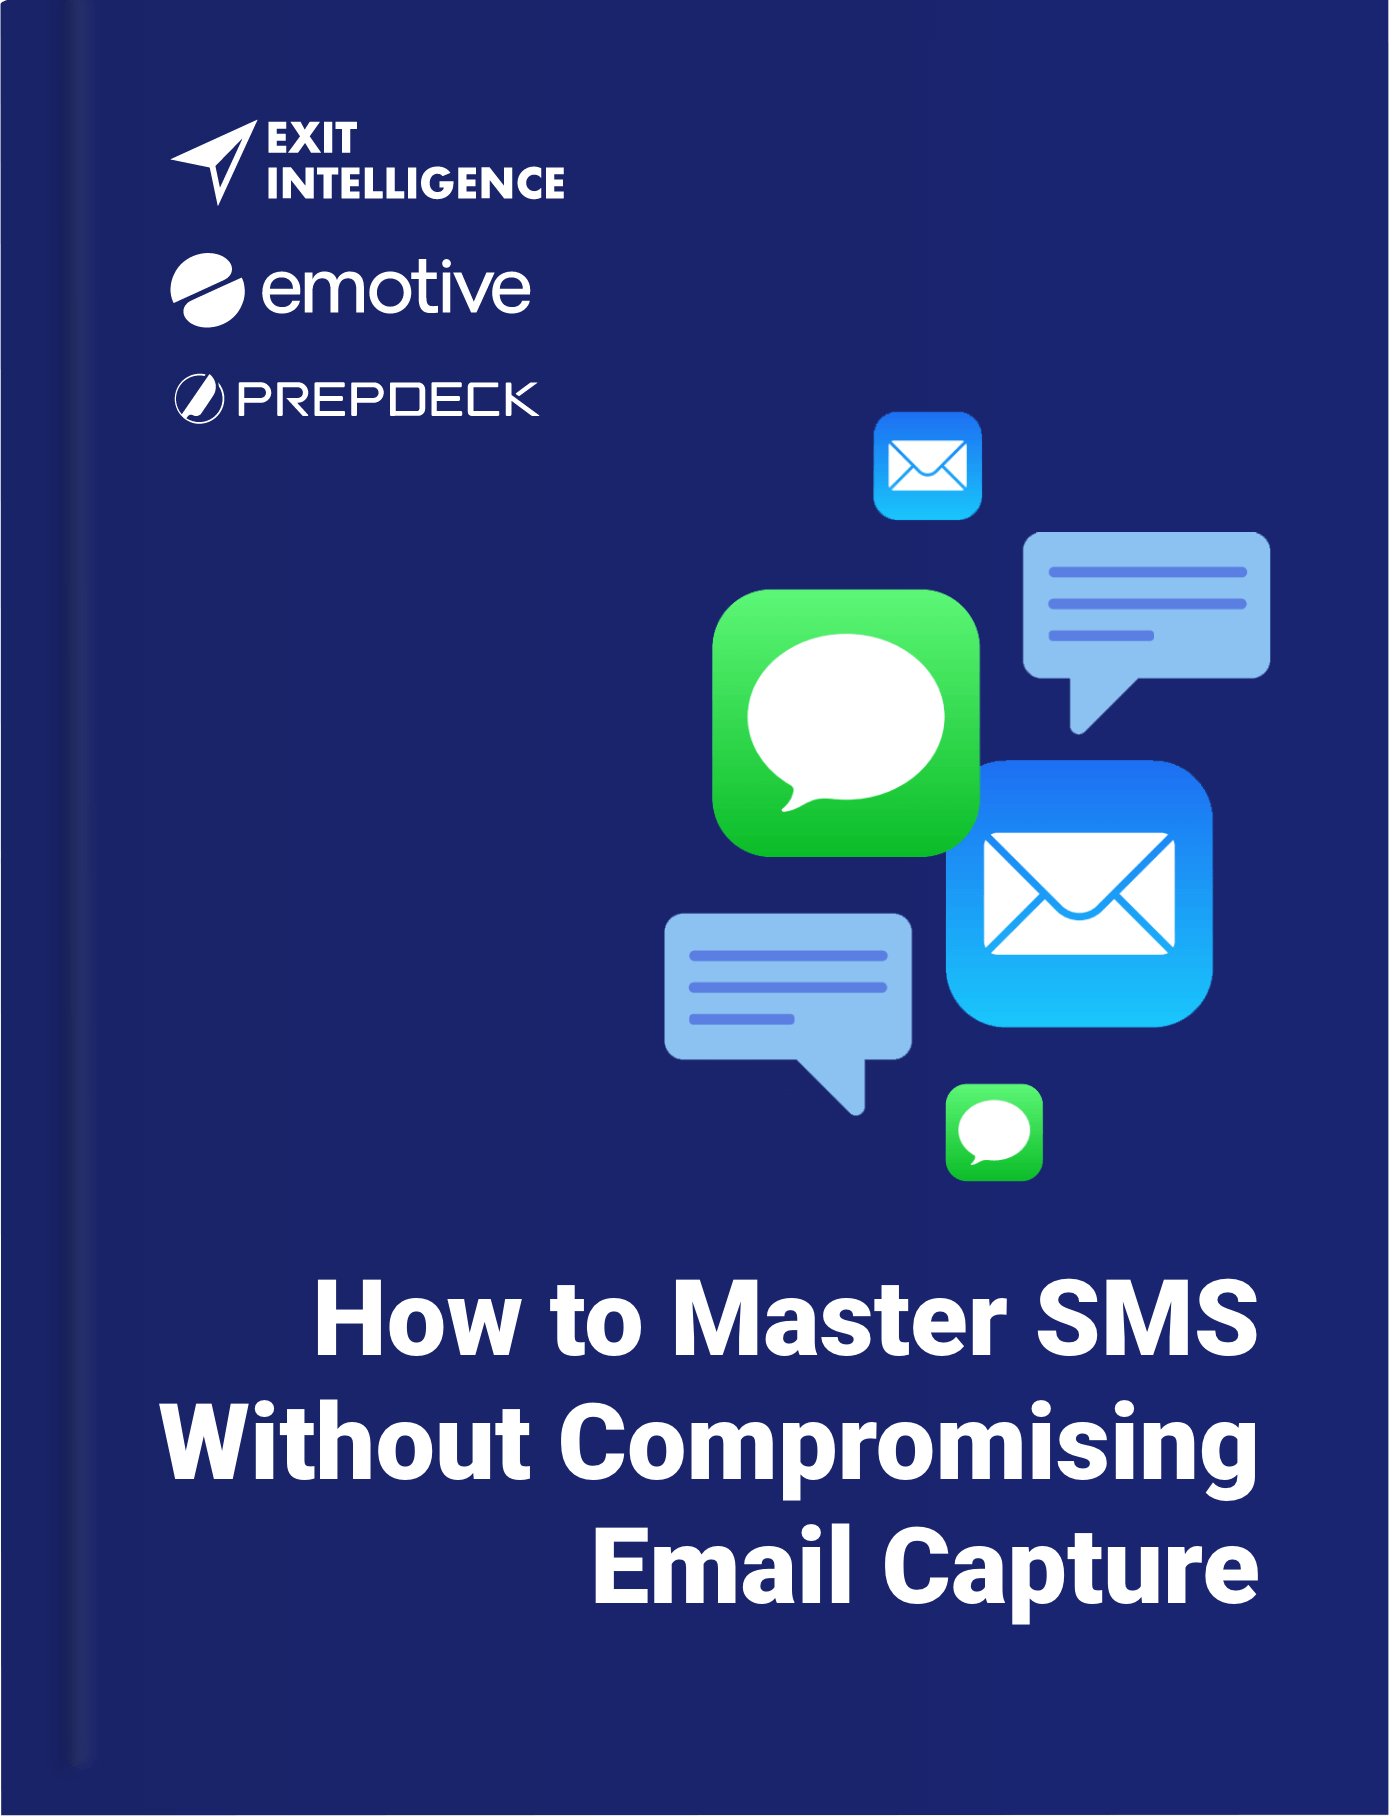 Ebook - How to Master SMS Without Compromising Email Capture